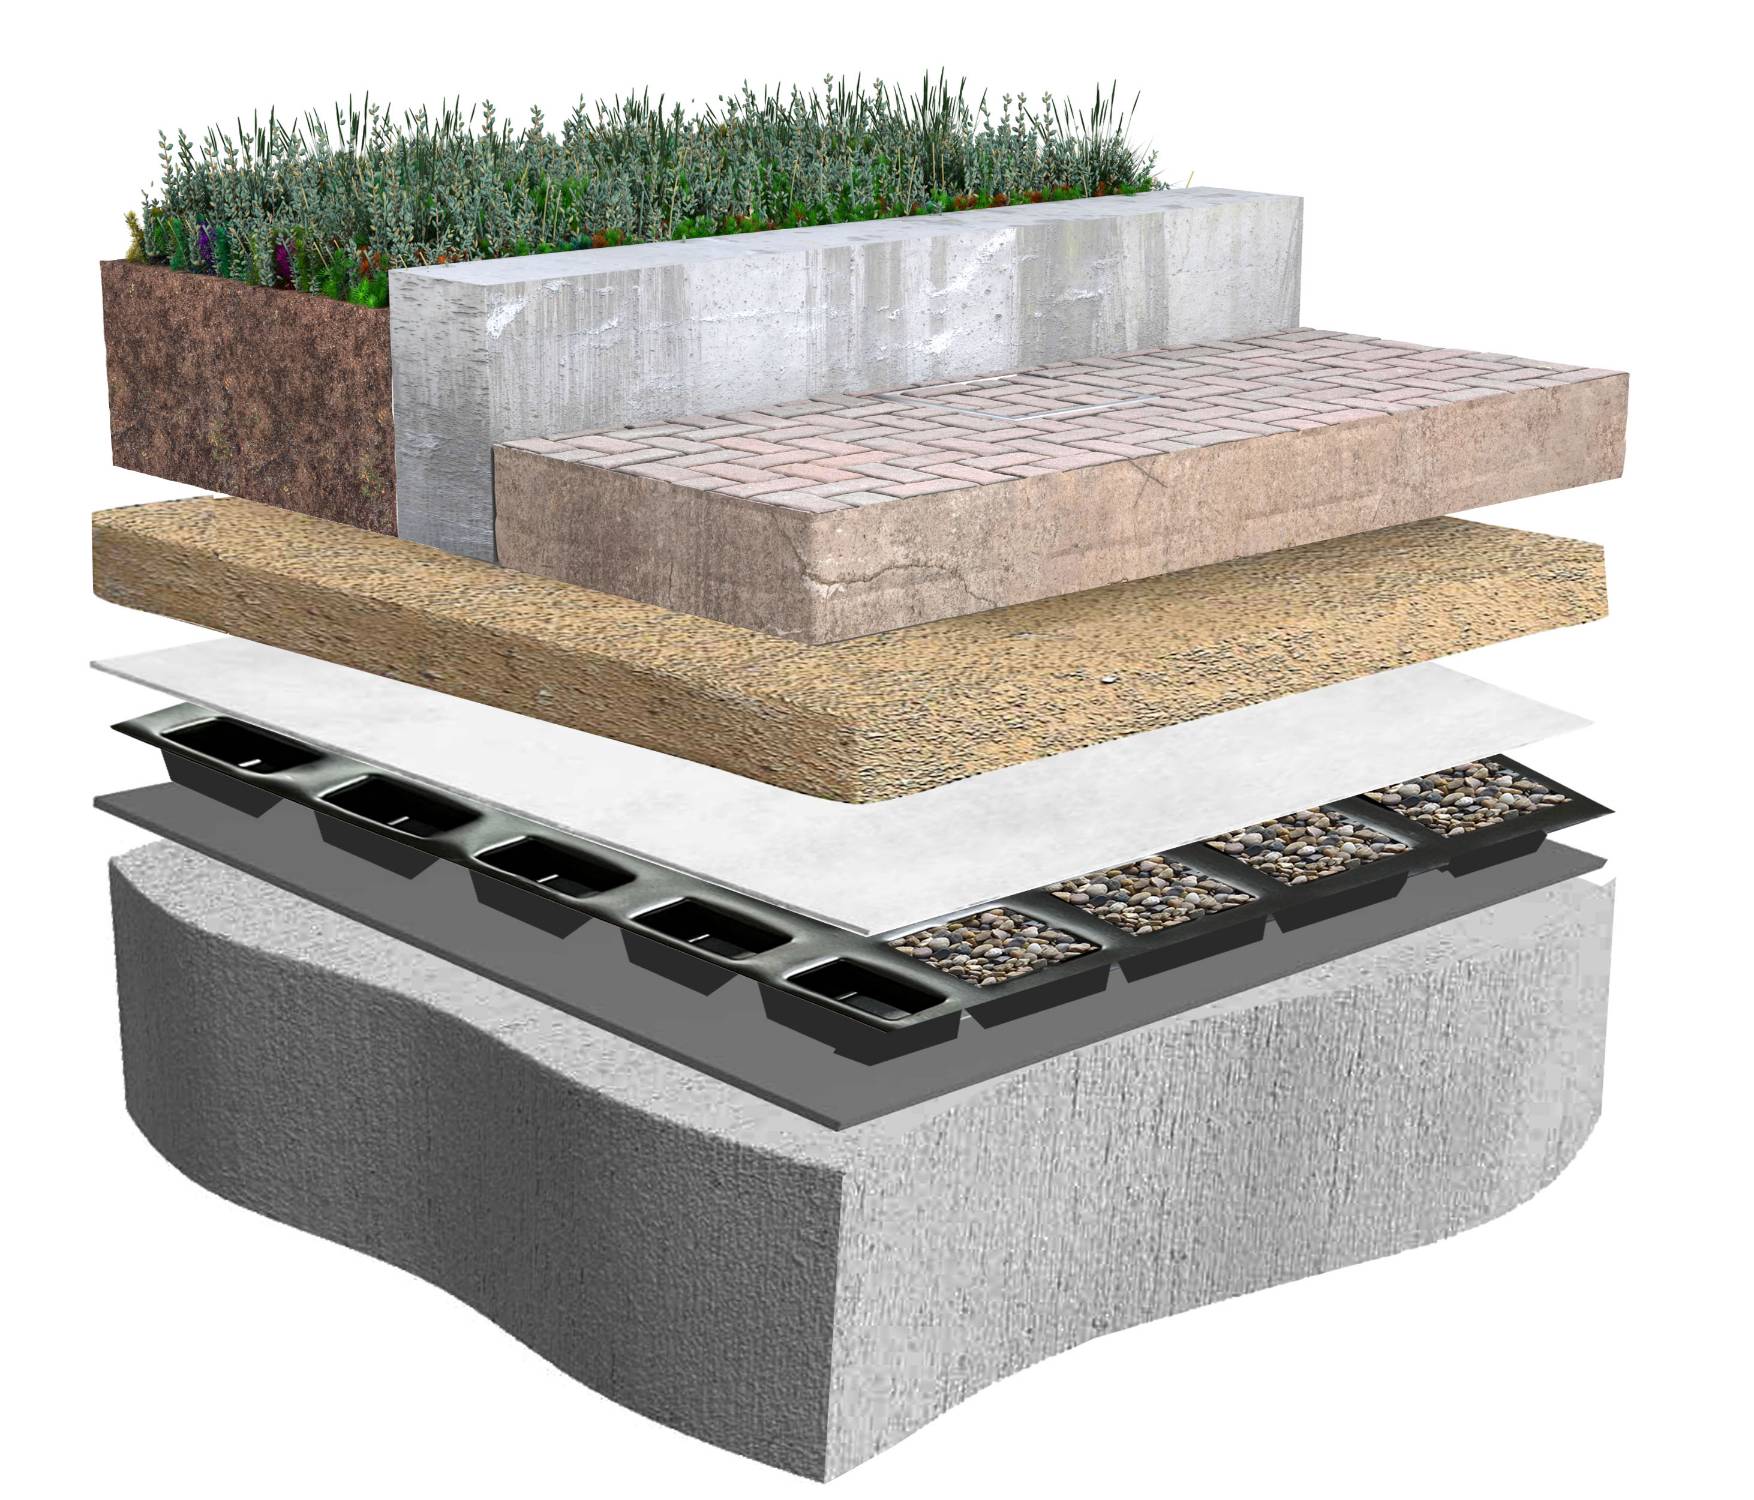 Roofdrain 60mm Reservoir Board drainage for extensive green roof or podium deck / landscaping areas